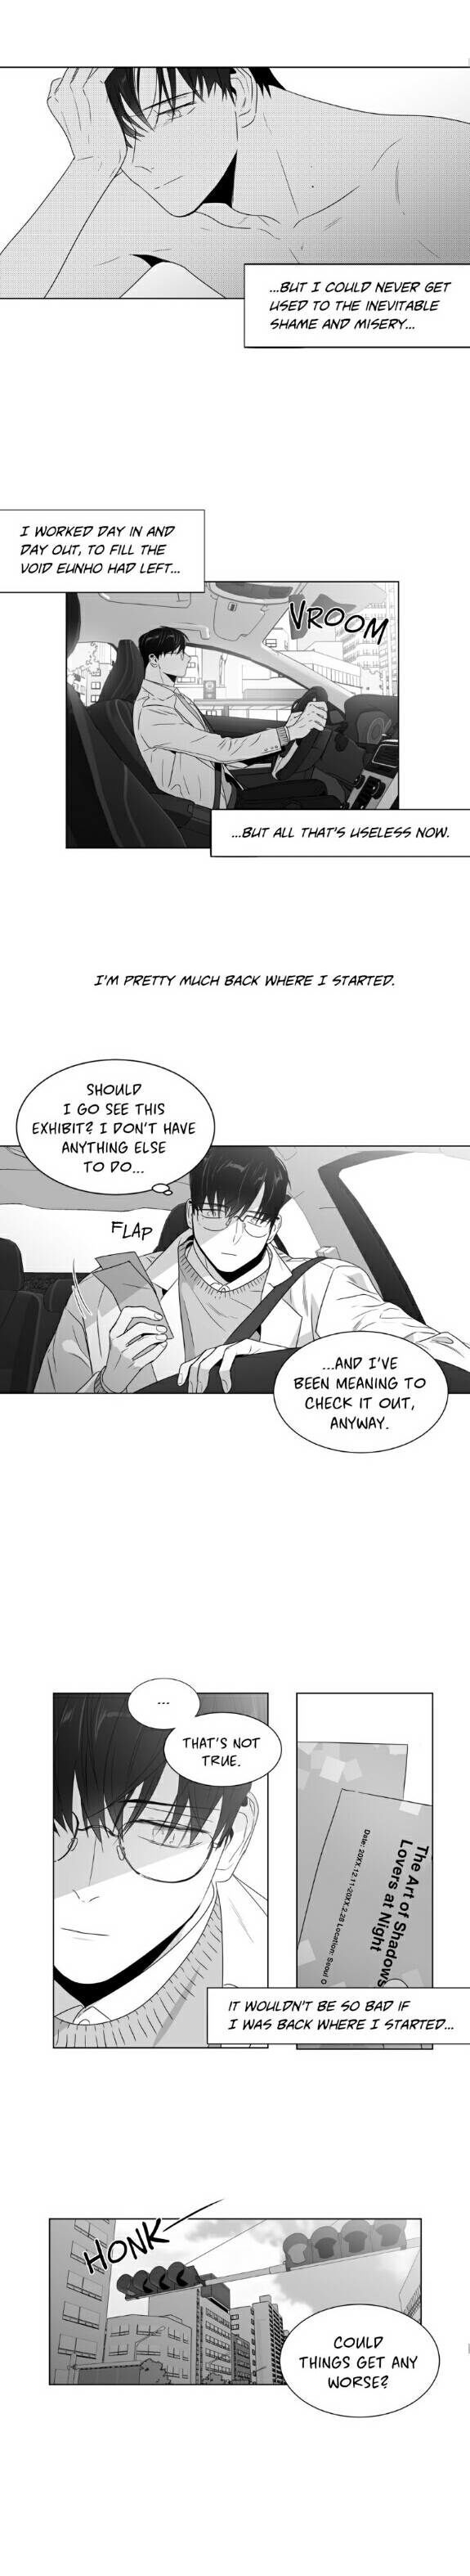 Lover Boy (Lezhin) Chapter 057 page 4